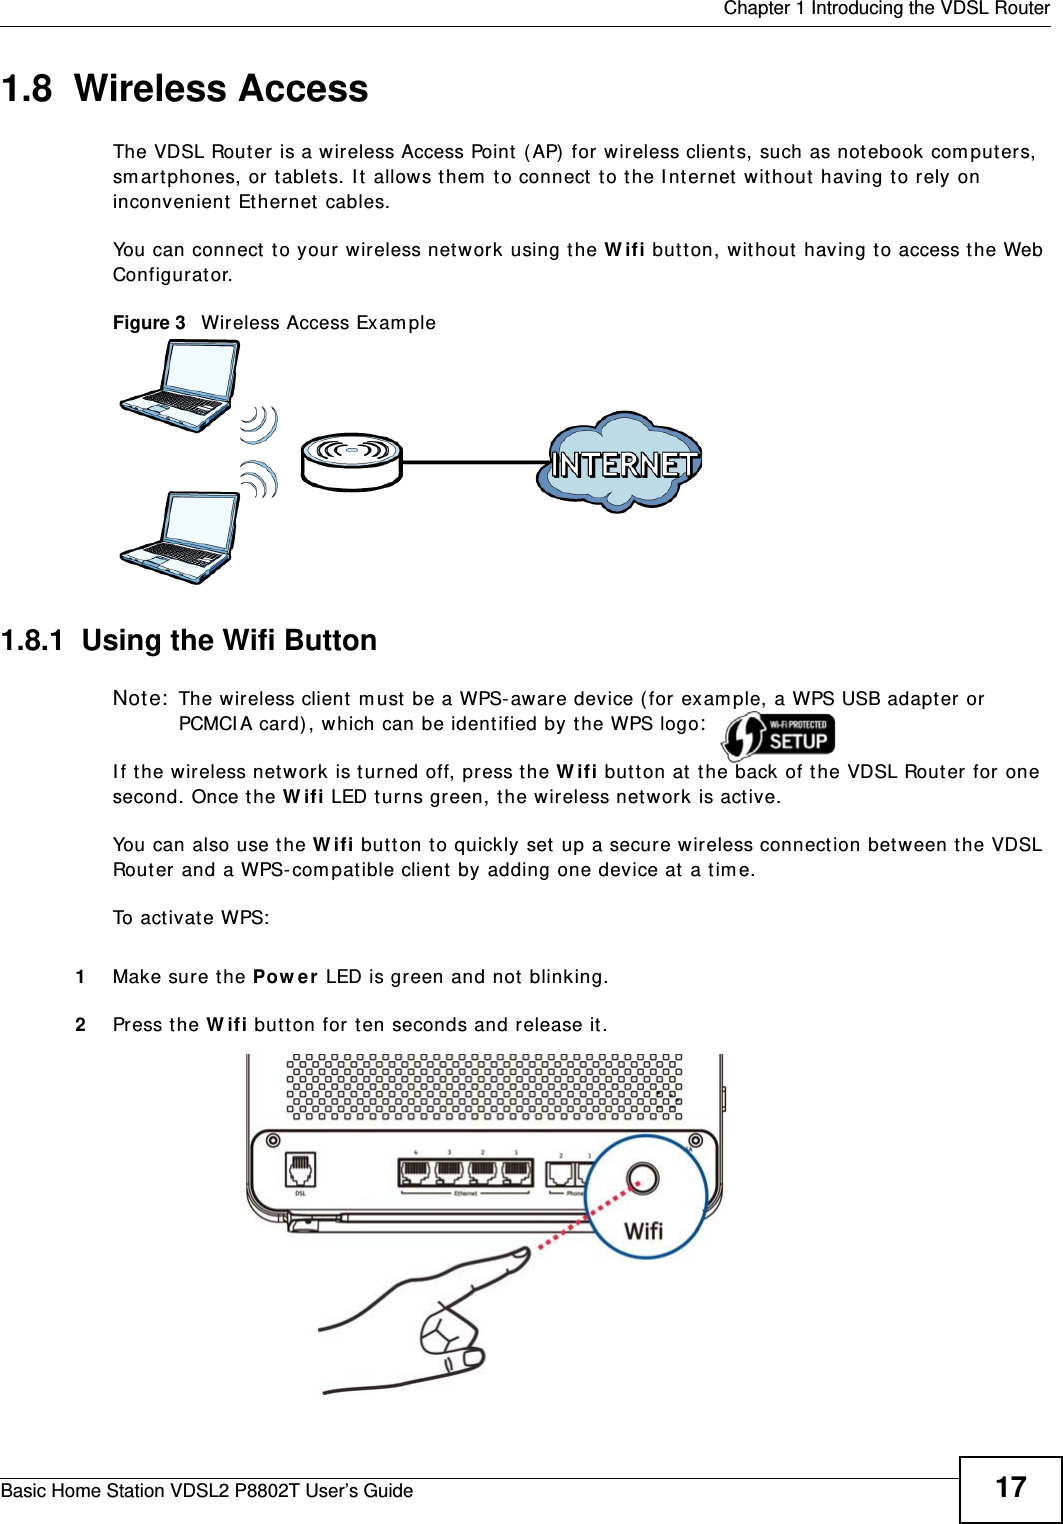  Chapter 1 Introducing the VDSL RouterBasic Home Station VDSL2 P8802T User’s Guide 171.8  Wireless AccessThe VDSL Router is a wireless Access Point ( AP)  for wireless clients, such as not ebook com put ers, sm artphones, or t ablet s. I t  allows them  t o connect  to the I nt er net  without  having to rely on inconvenient  Ethernet cables.You can connect  to your wireless net work using the W ifi but t on, wit hout having to access the Web Configurat or.Figure 3   Wireless Access Exam ple1.8.1  Using the Wifi ButtonNote:  The wireless client  m ust  be a WPS- aware device (for exam ple, a WPS USB adapt er or PCMCI A card), which can be ident ified by t he WPS logo:  I f the wireless net work is t urned off, press the W ifi but t on at t he back of t he VDSL Router for  one second. Once t he W ifi LED turns green, t he wireless net work is act ive.You can also use the W ifi but t on t o quickly set  up a secure w ireless connect ion bet ween t he VDSL Router and a WPS- com pat ible client by adding one device at a t im e.To act ivate WPS:1Make sure t he Pow e r LED is green and not blinking.2Press t he W ifi but t on for ten seconds and release it. 